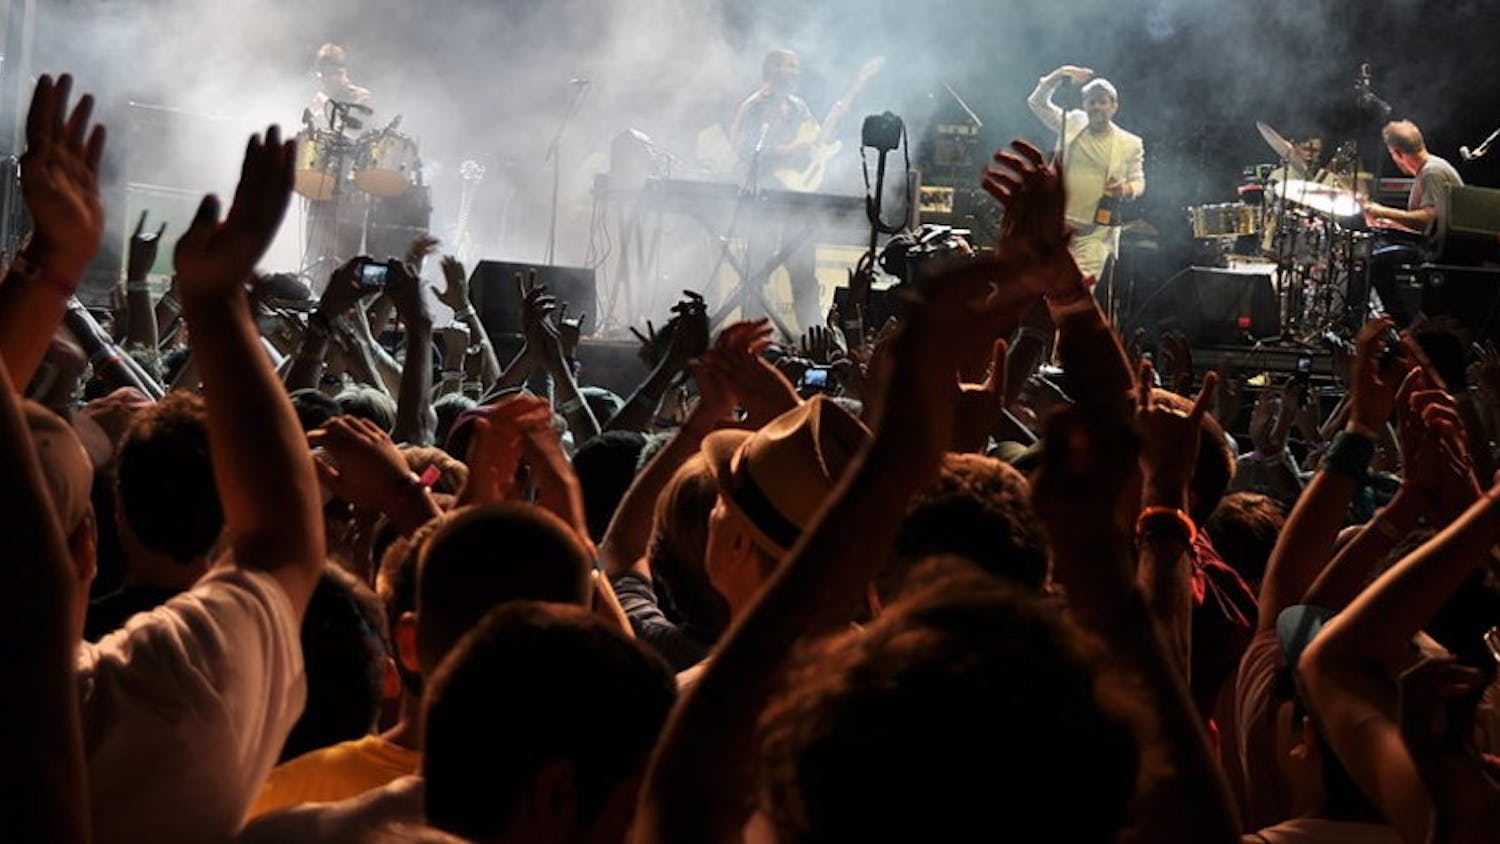 LCD Soundsystem, pictured performing in 2010, will perform at The Anthem for two nights in October.&nbsp;